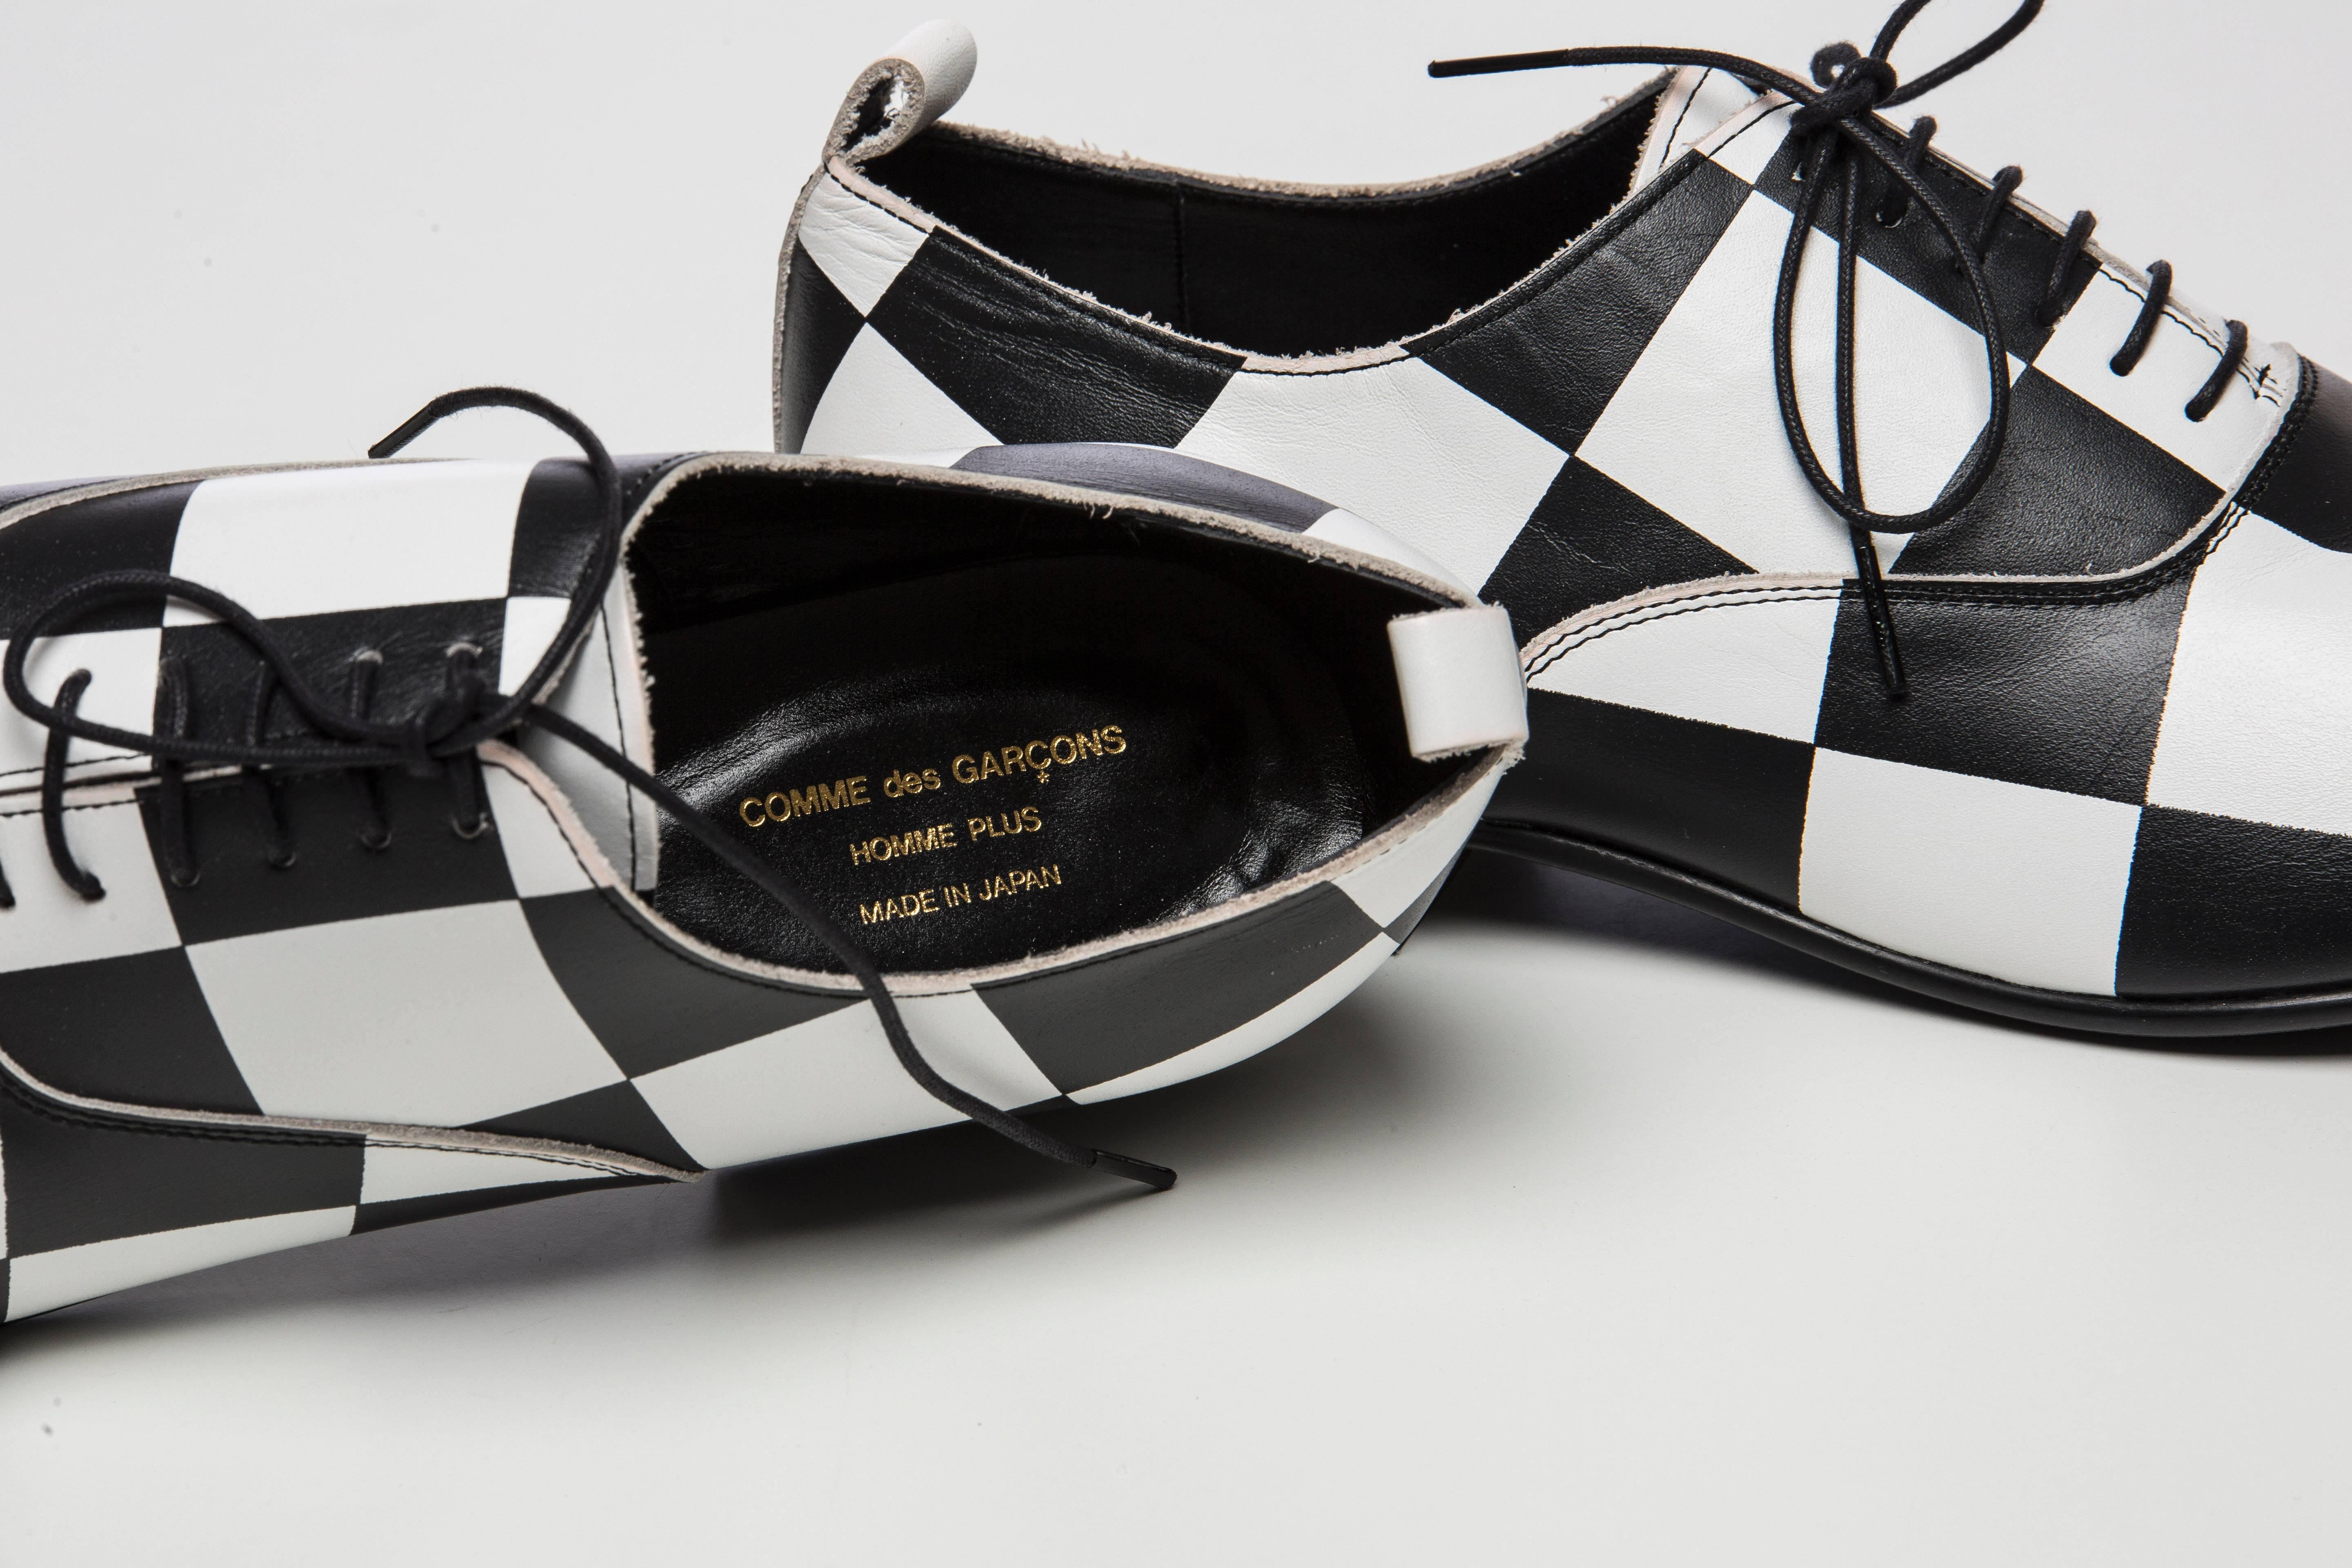 Comme des Garcons Men's Black and White Checkered Leather Shoes, Spring 2013 1